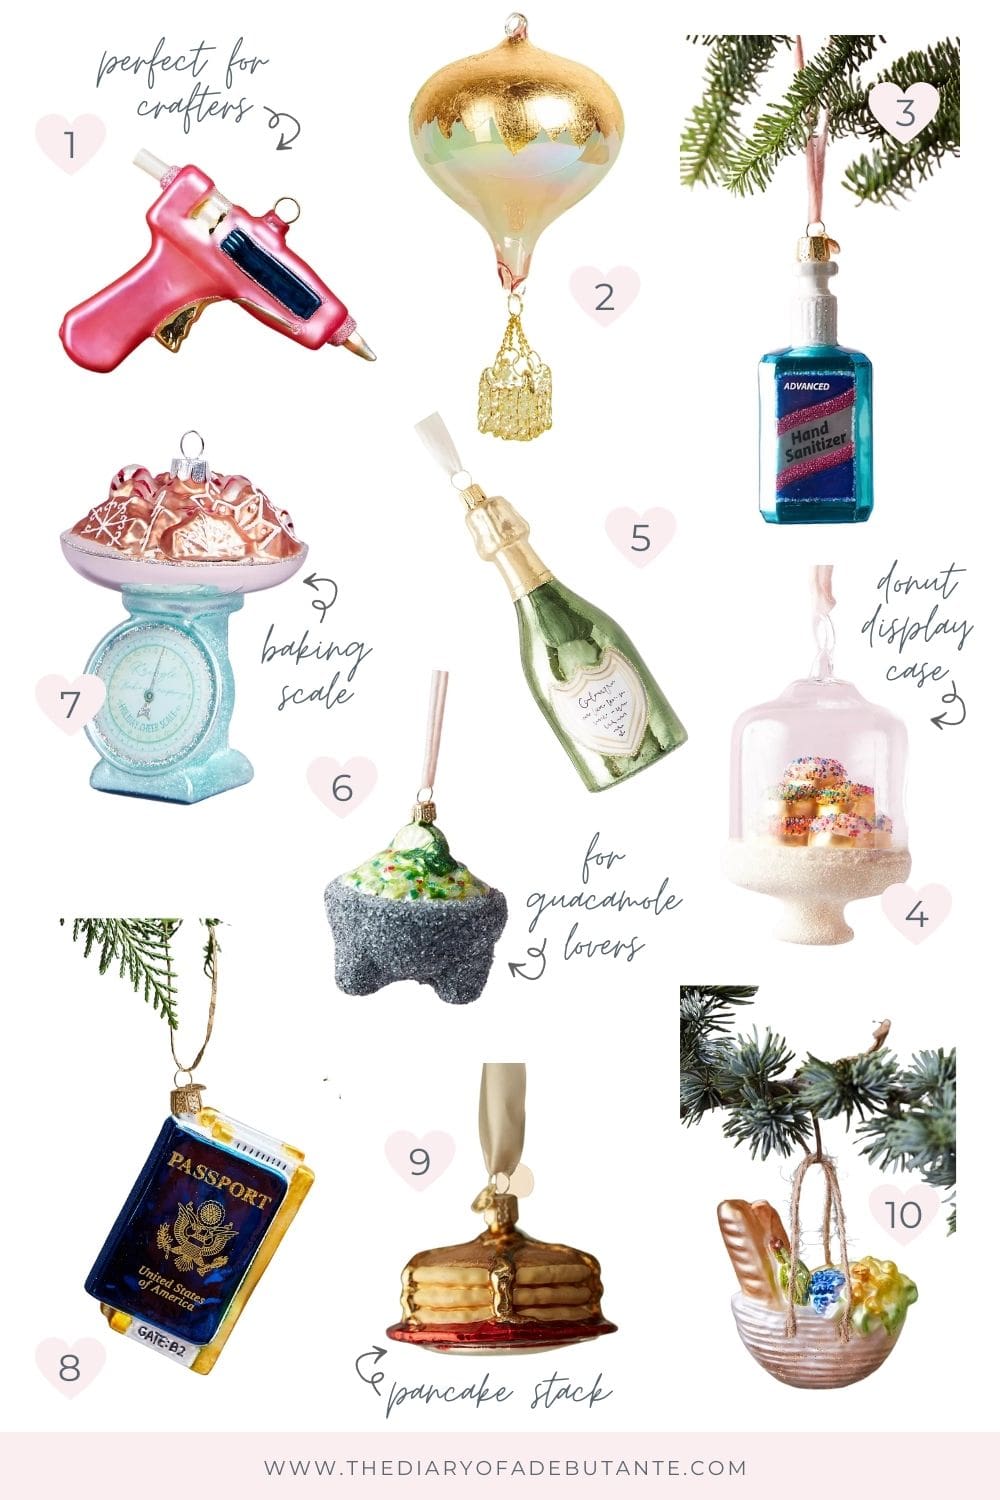 Best Anthropologie Christmas ornaments to give as gifts curated by blogger Stephanie Ziajka on Diary of a Debutante